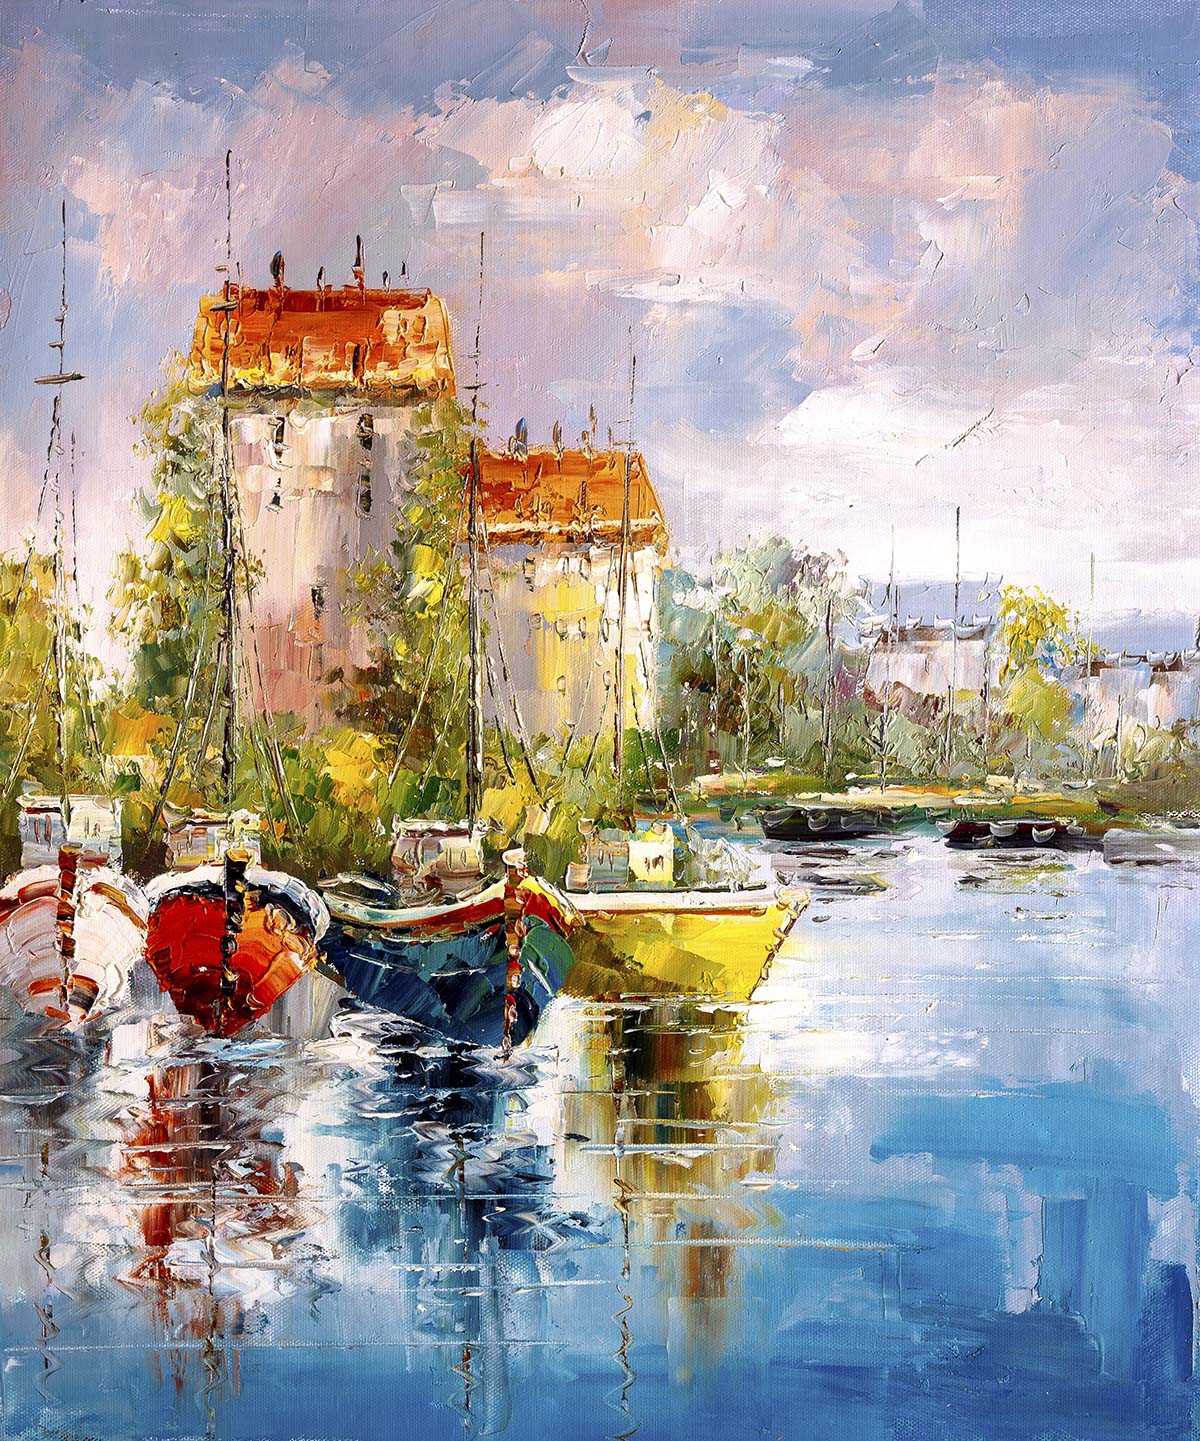 A painting of boats on water